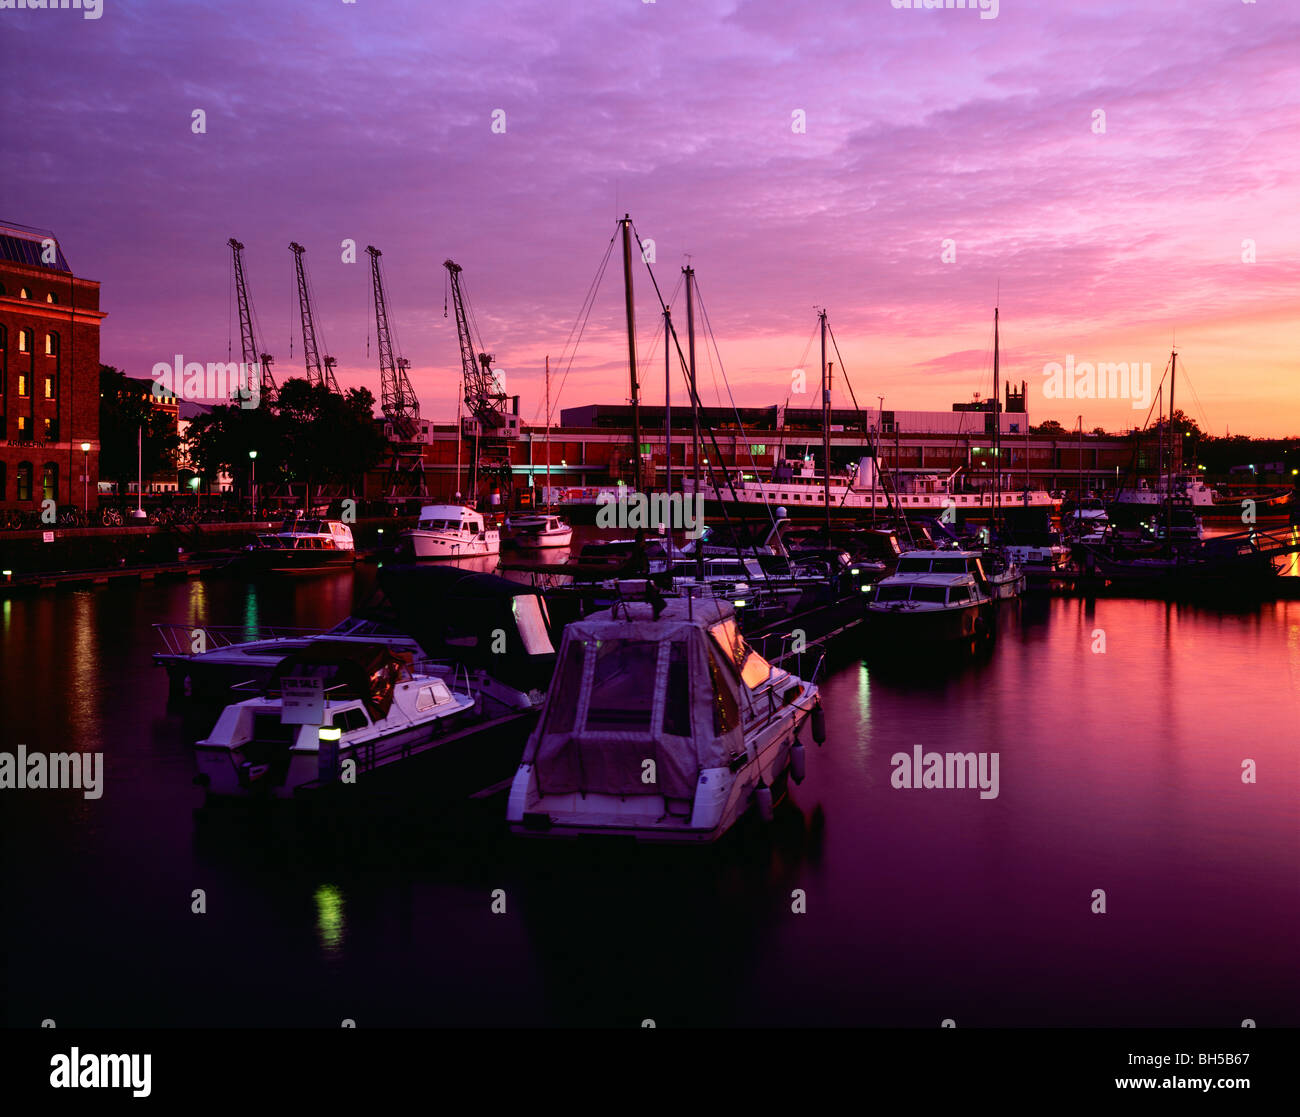 The Floating Harbour at St. Augustine's Reach in der City of Bristol at Dusk, Bristol, England. Stockfoto